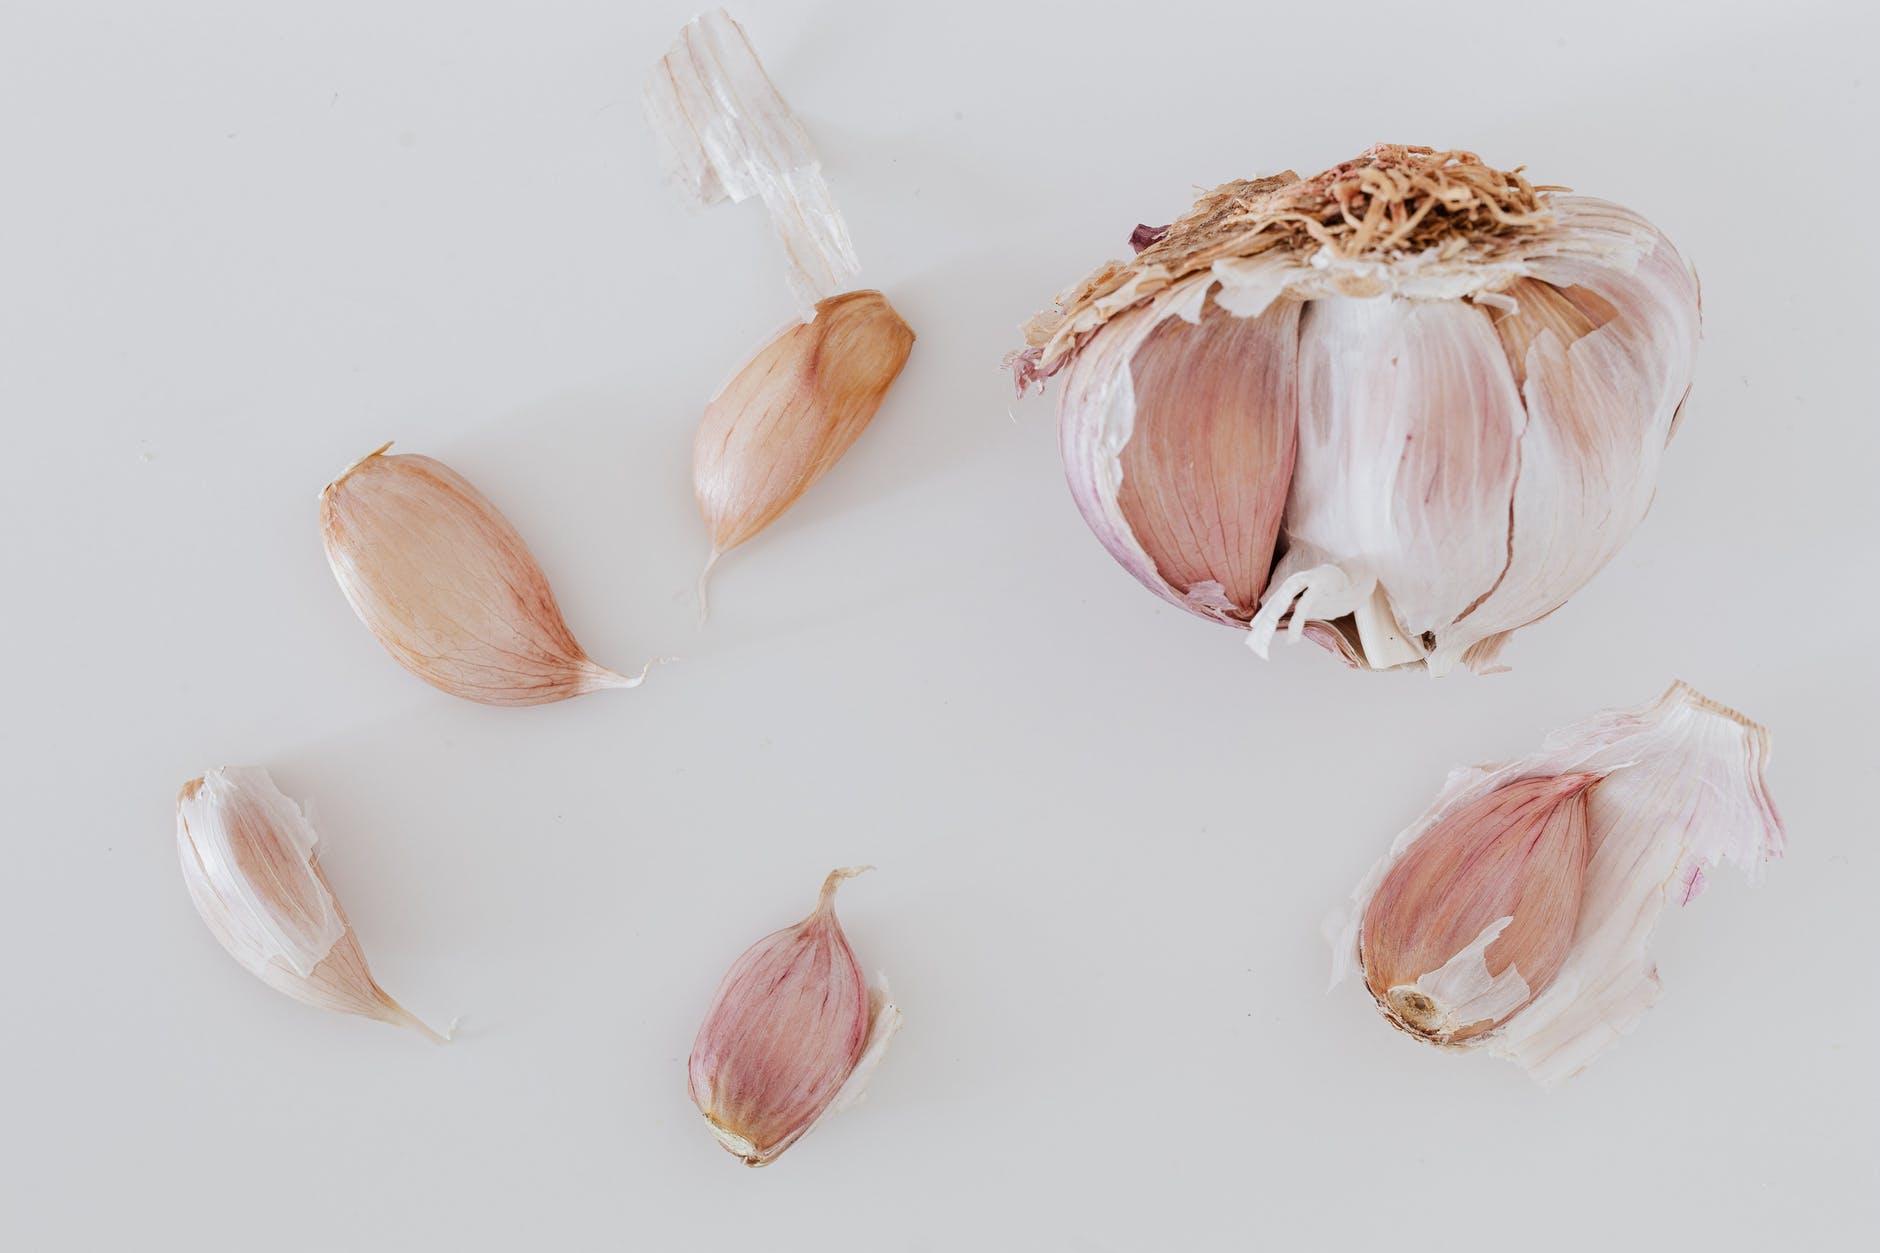 bulb of garlic and scattered cloves of garlic in peel on gray table